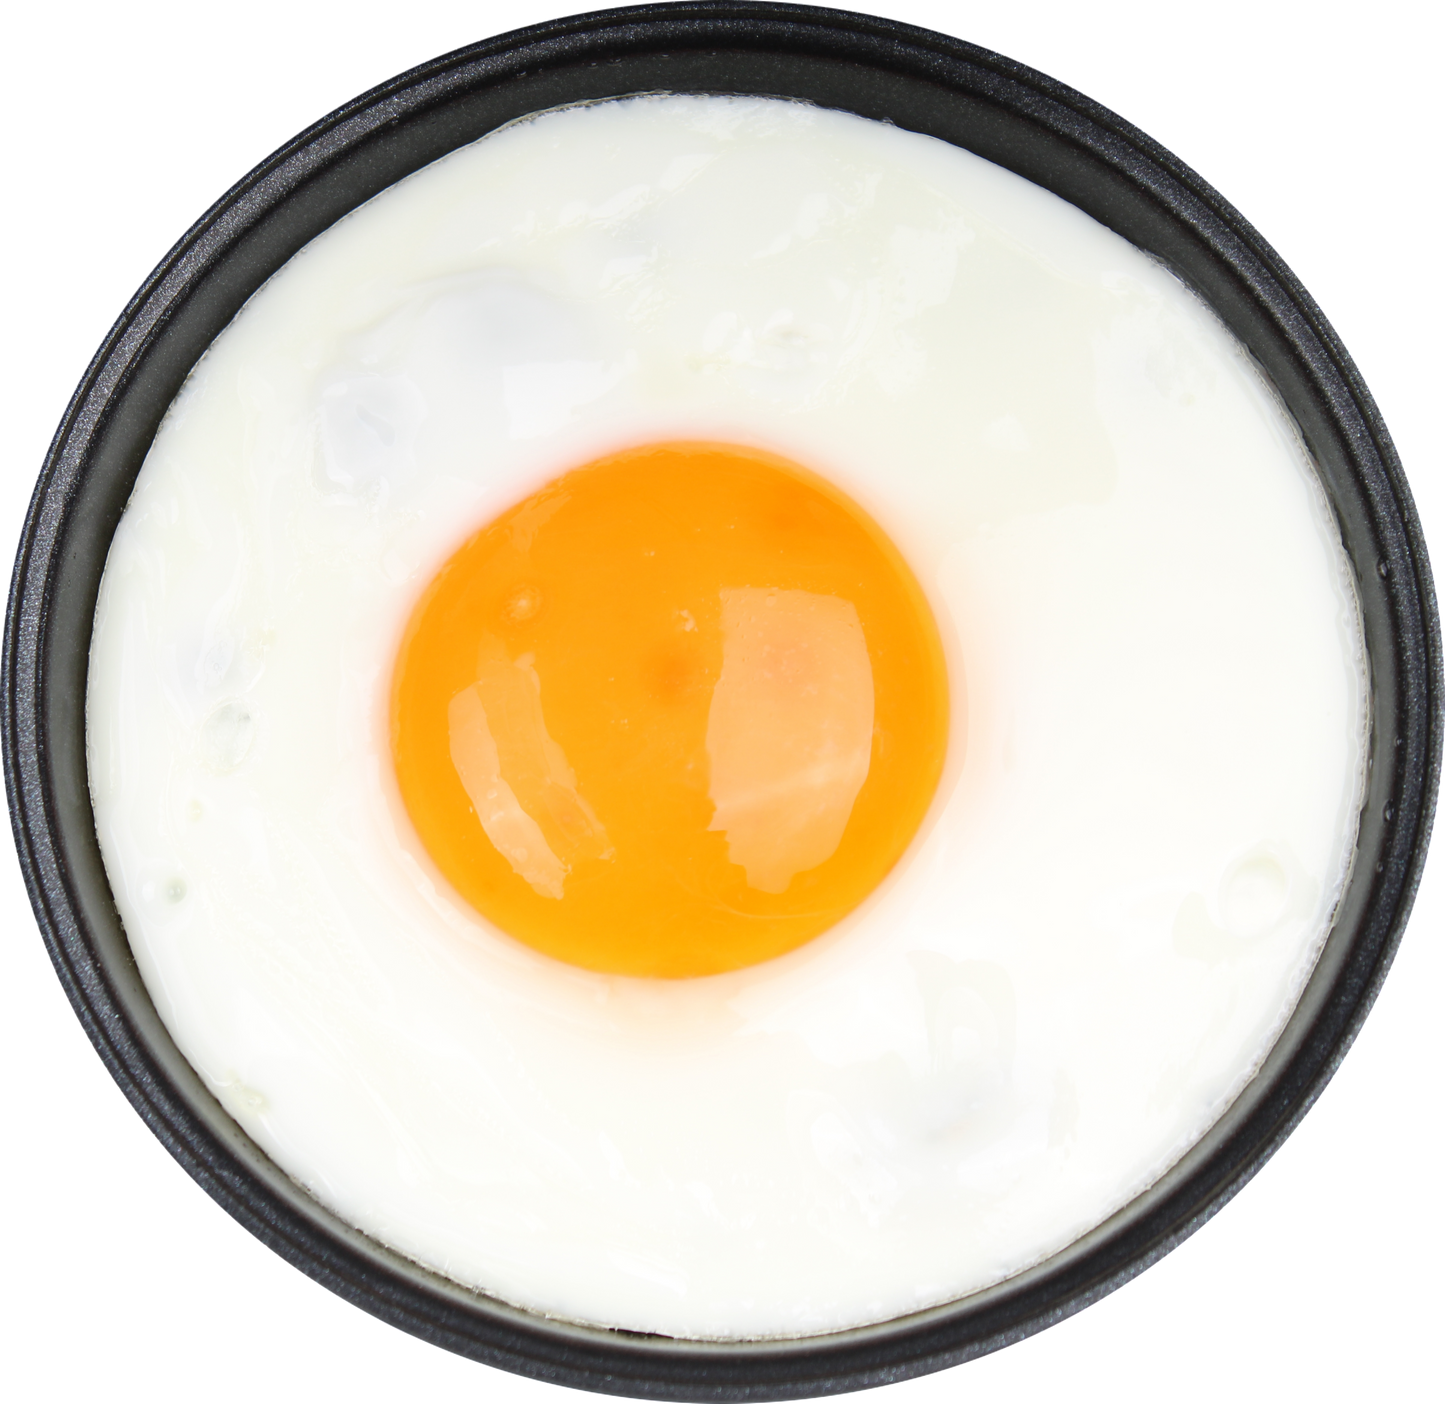 HYS Smart Fried Egg Cooker – Delicious & On-Demand by HYS Cooker